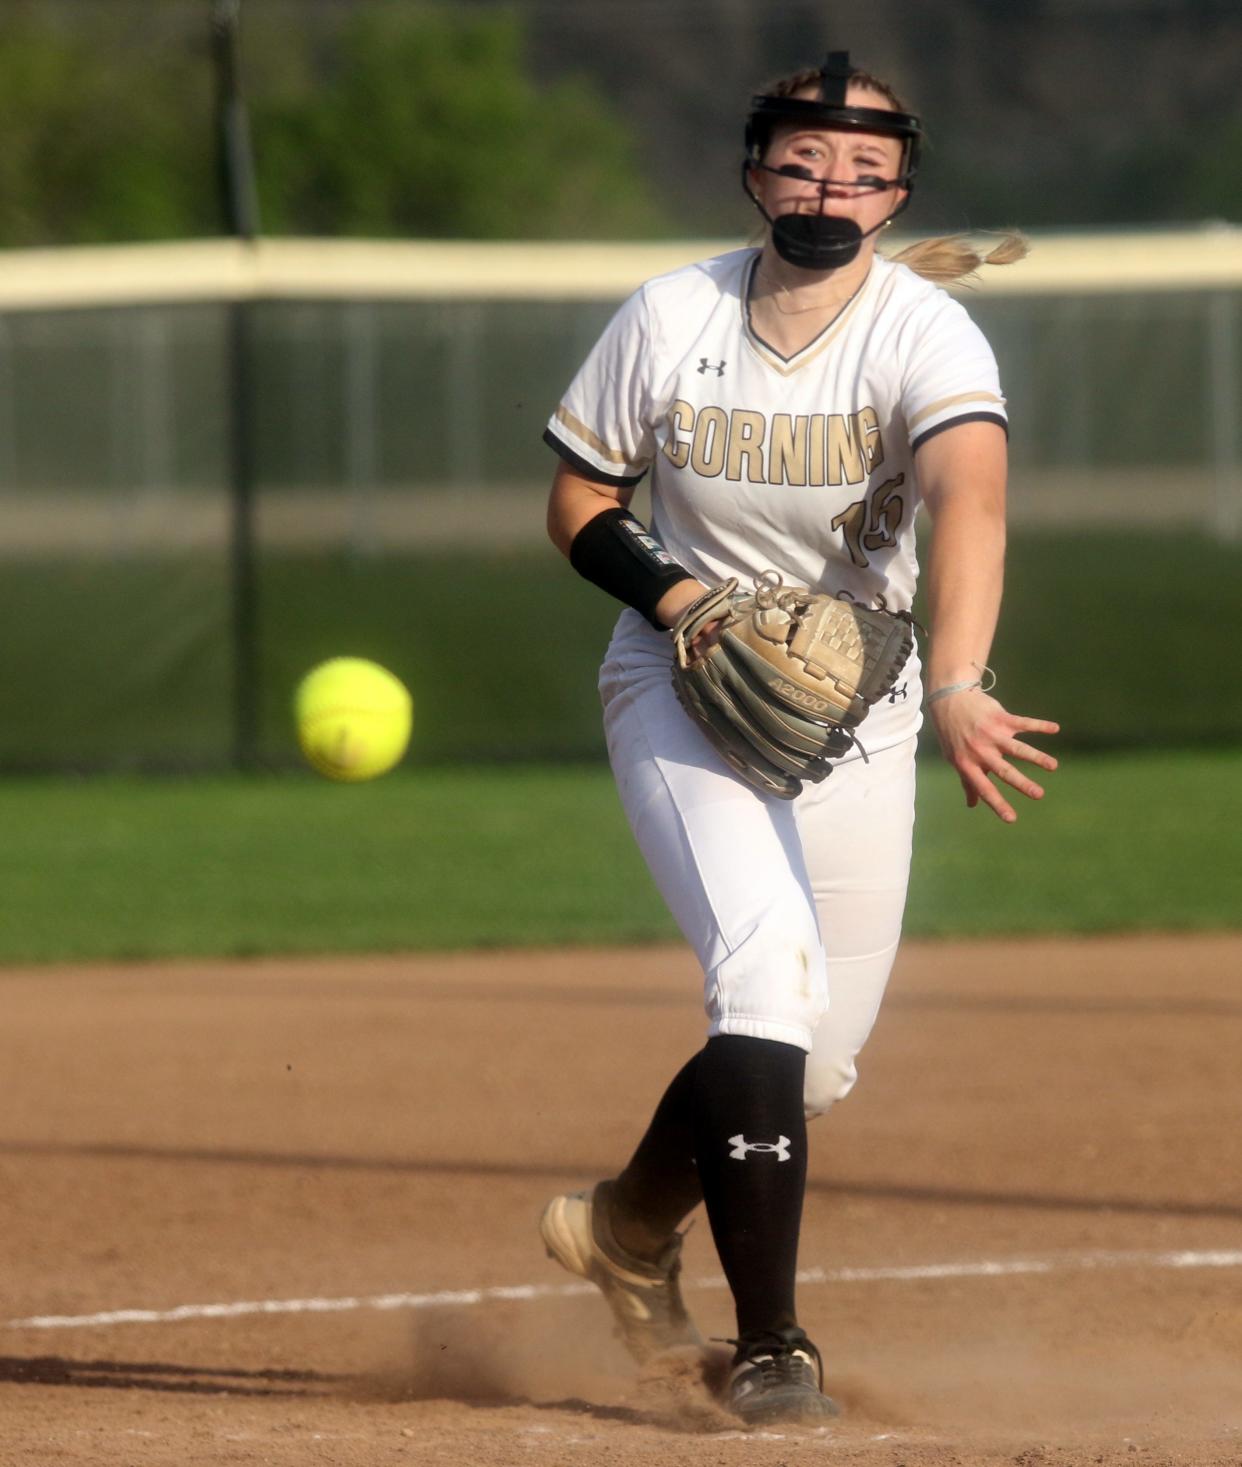 Peyton Sullivan pitches for Corning in a 9-5 loss to Vestal in softball April 21, 2023 at Corning-Painted Post High School.